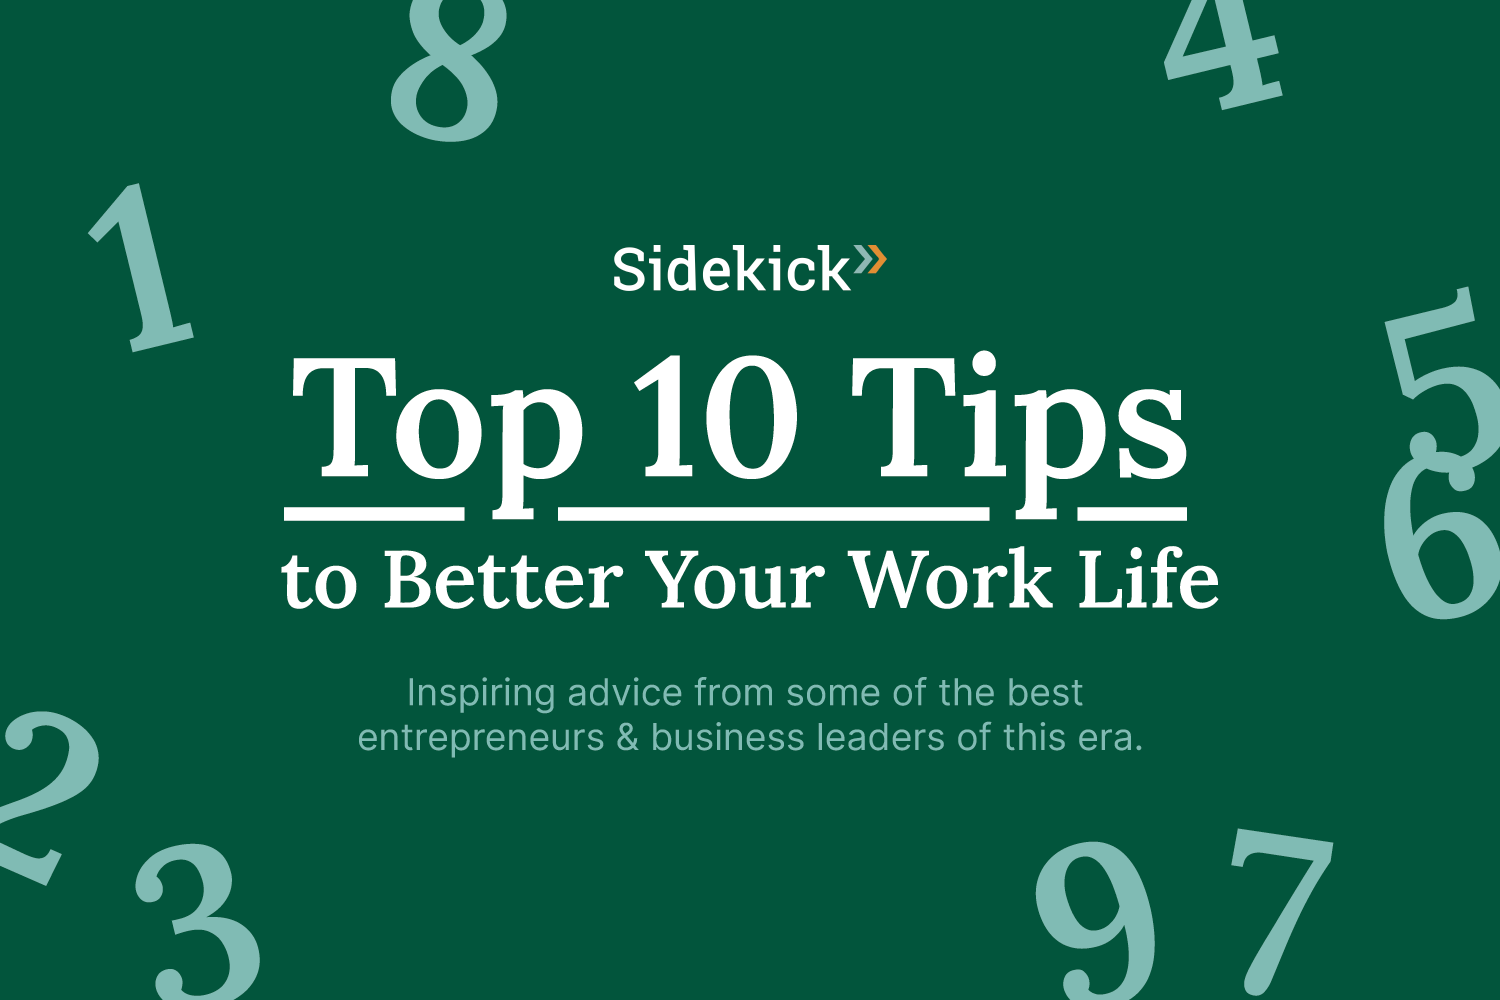  10 Tips to Better Your Work life Text 